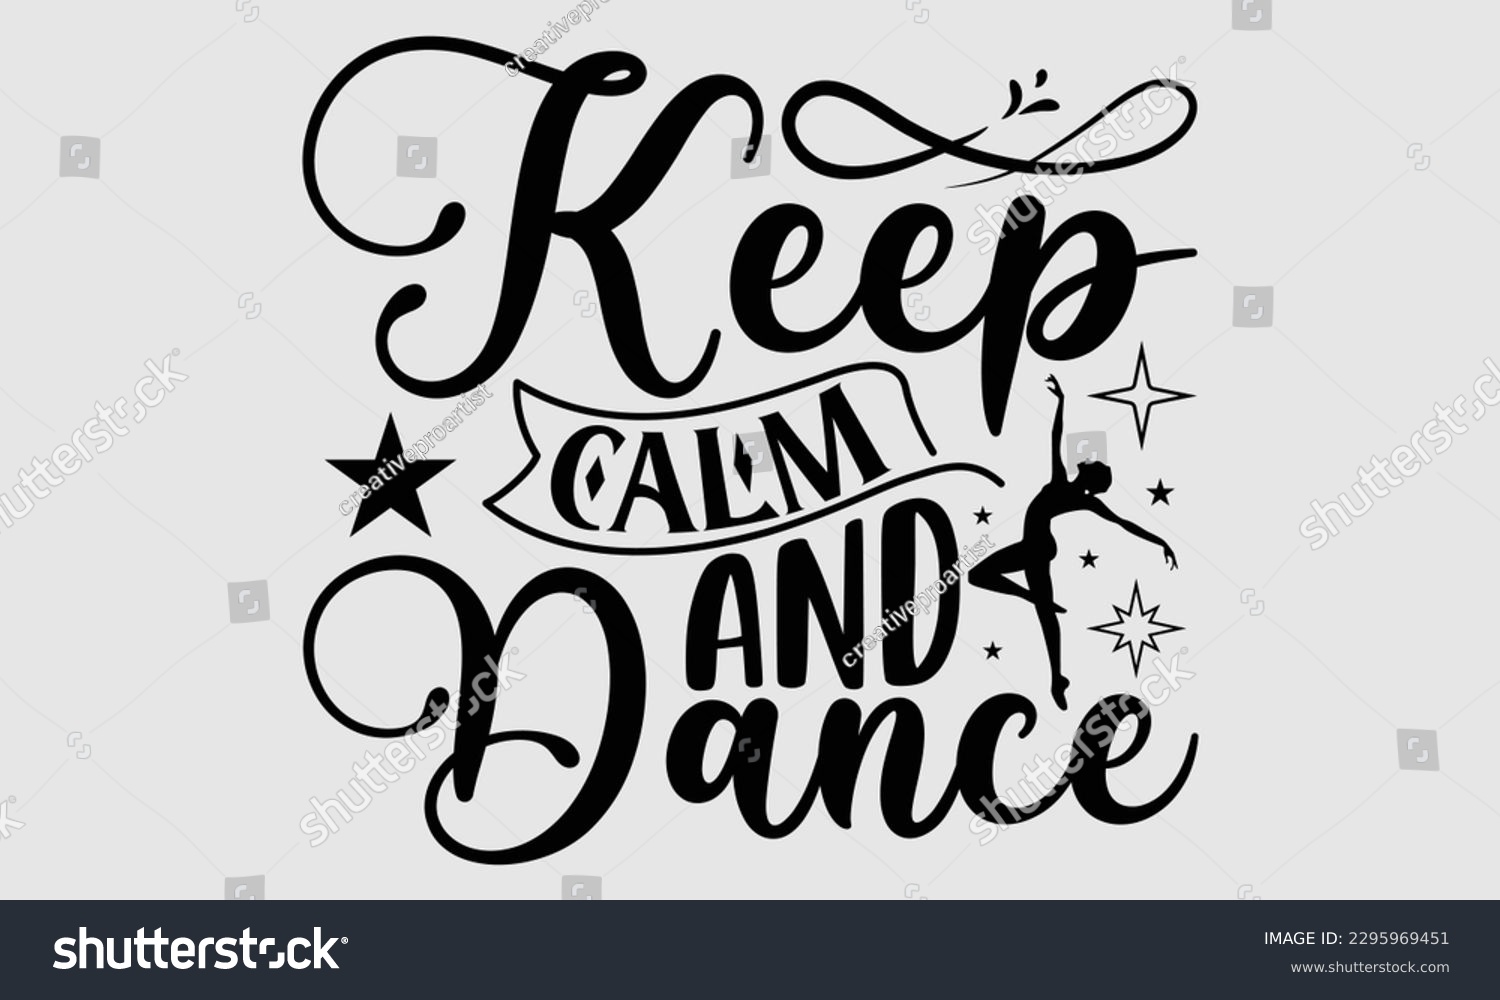 SVG of Keep calm and dance- Dances SVG design, Hand drawn lettering phrase, This illustration can be used as a print on t-shirts and bags, Vector Template EPS 10 svg